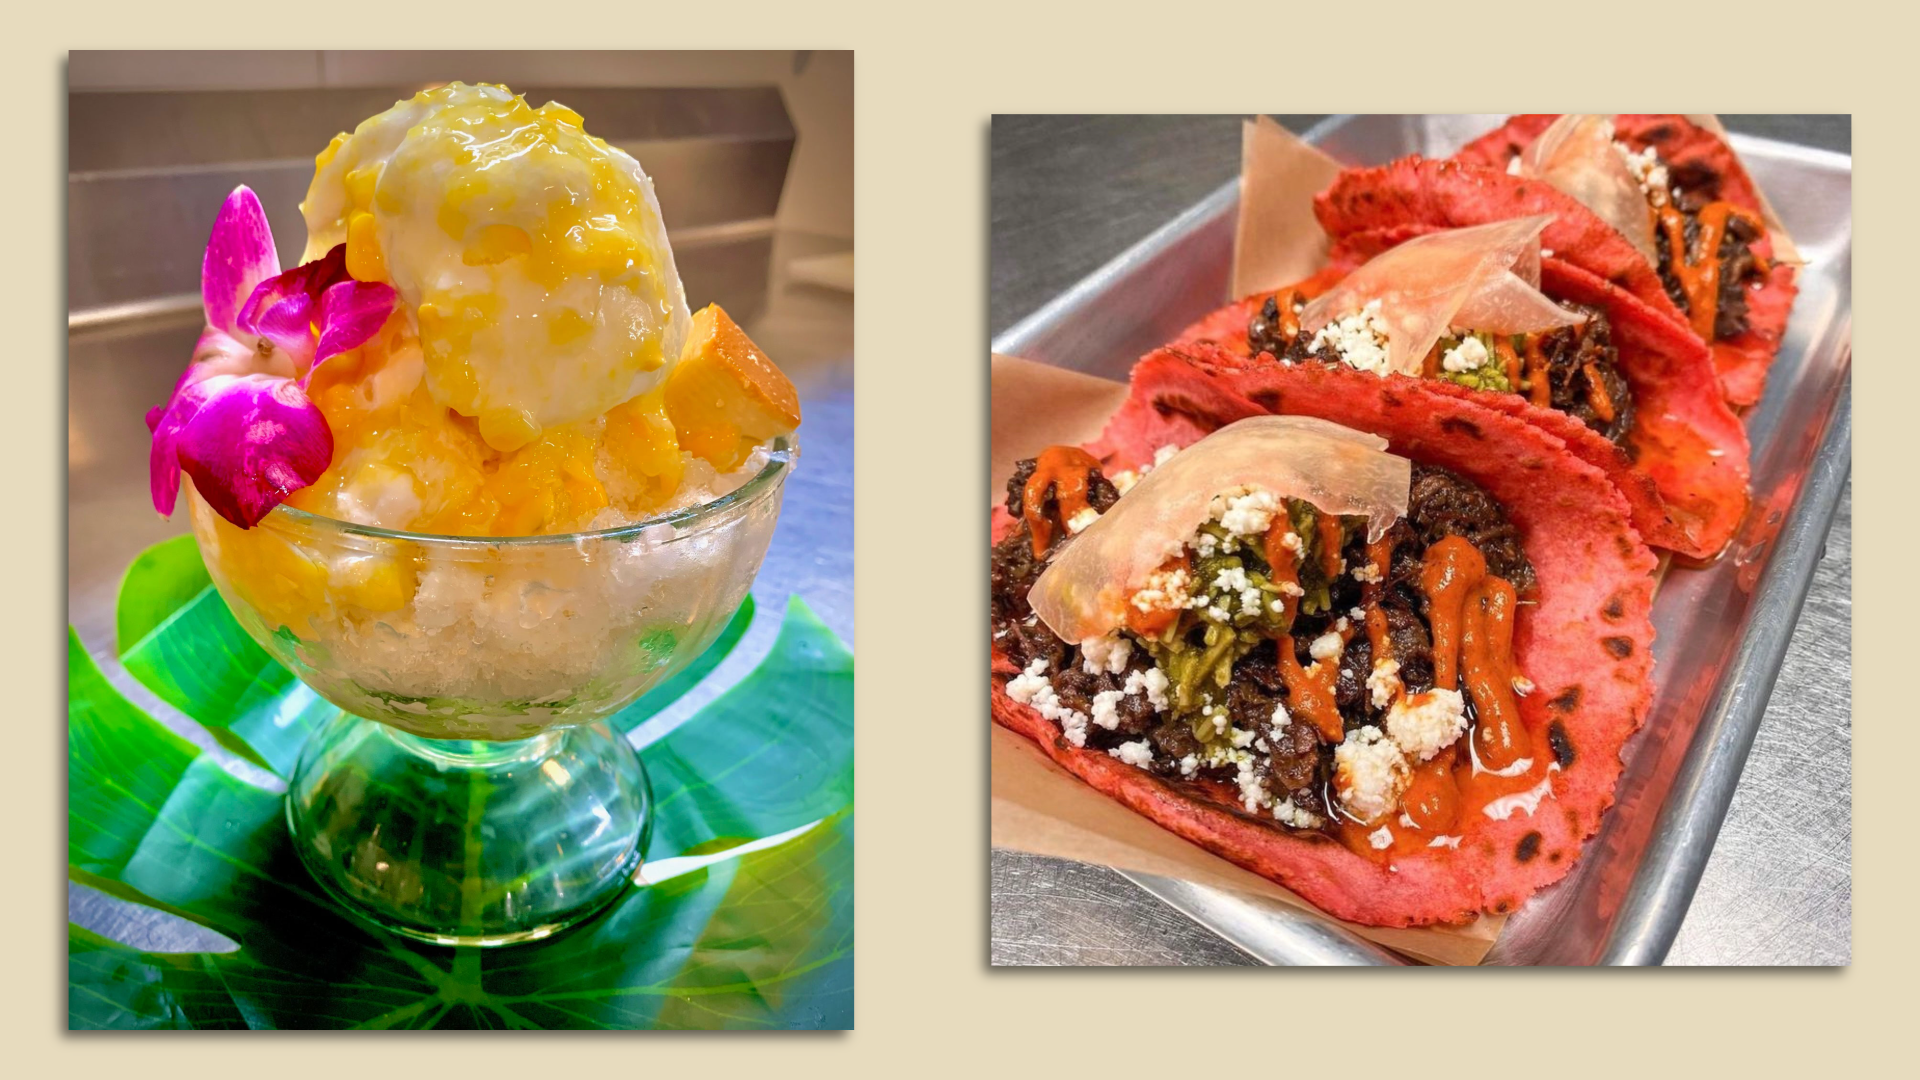 Mais con Yelo from Sari-Sari is a Filipino dessert made with layers of shaved ice, creamed corn and sweetened milk. The Big Red & Barbacoa Taco Flight from Stixs & Stone uses homemade Big Red corn tortillas and strawberry and Big Red jam.